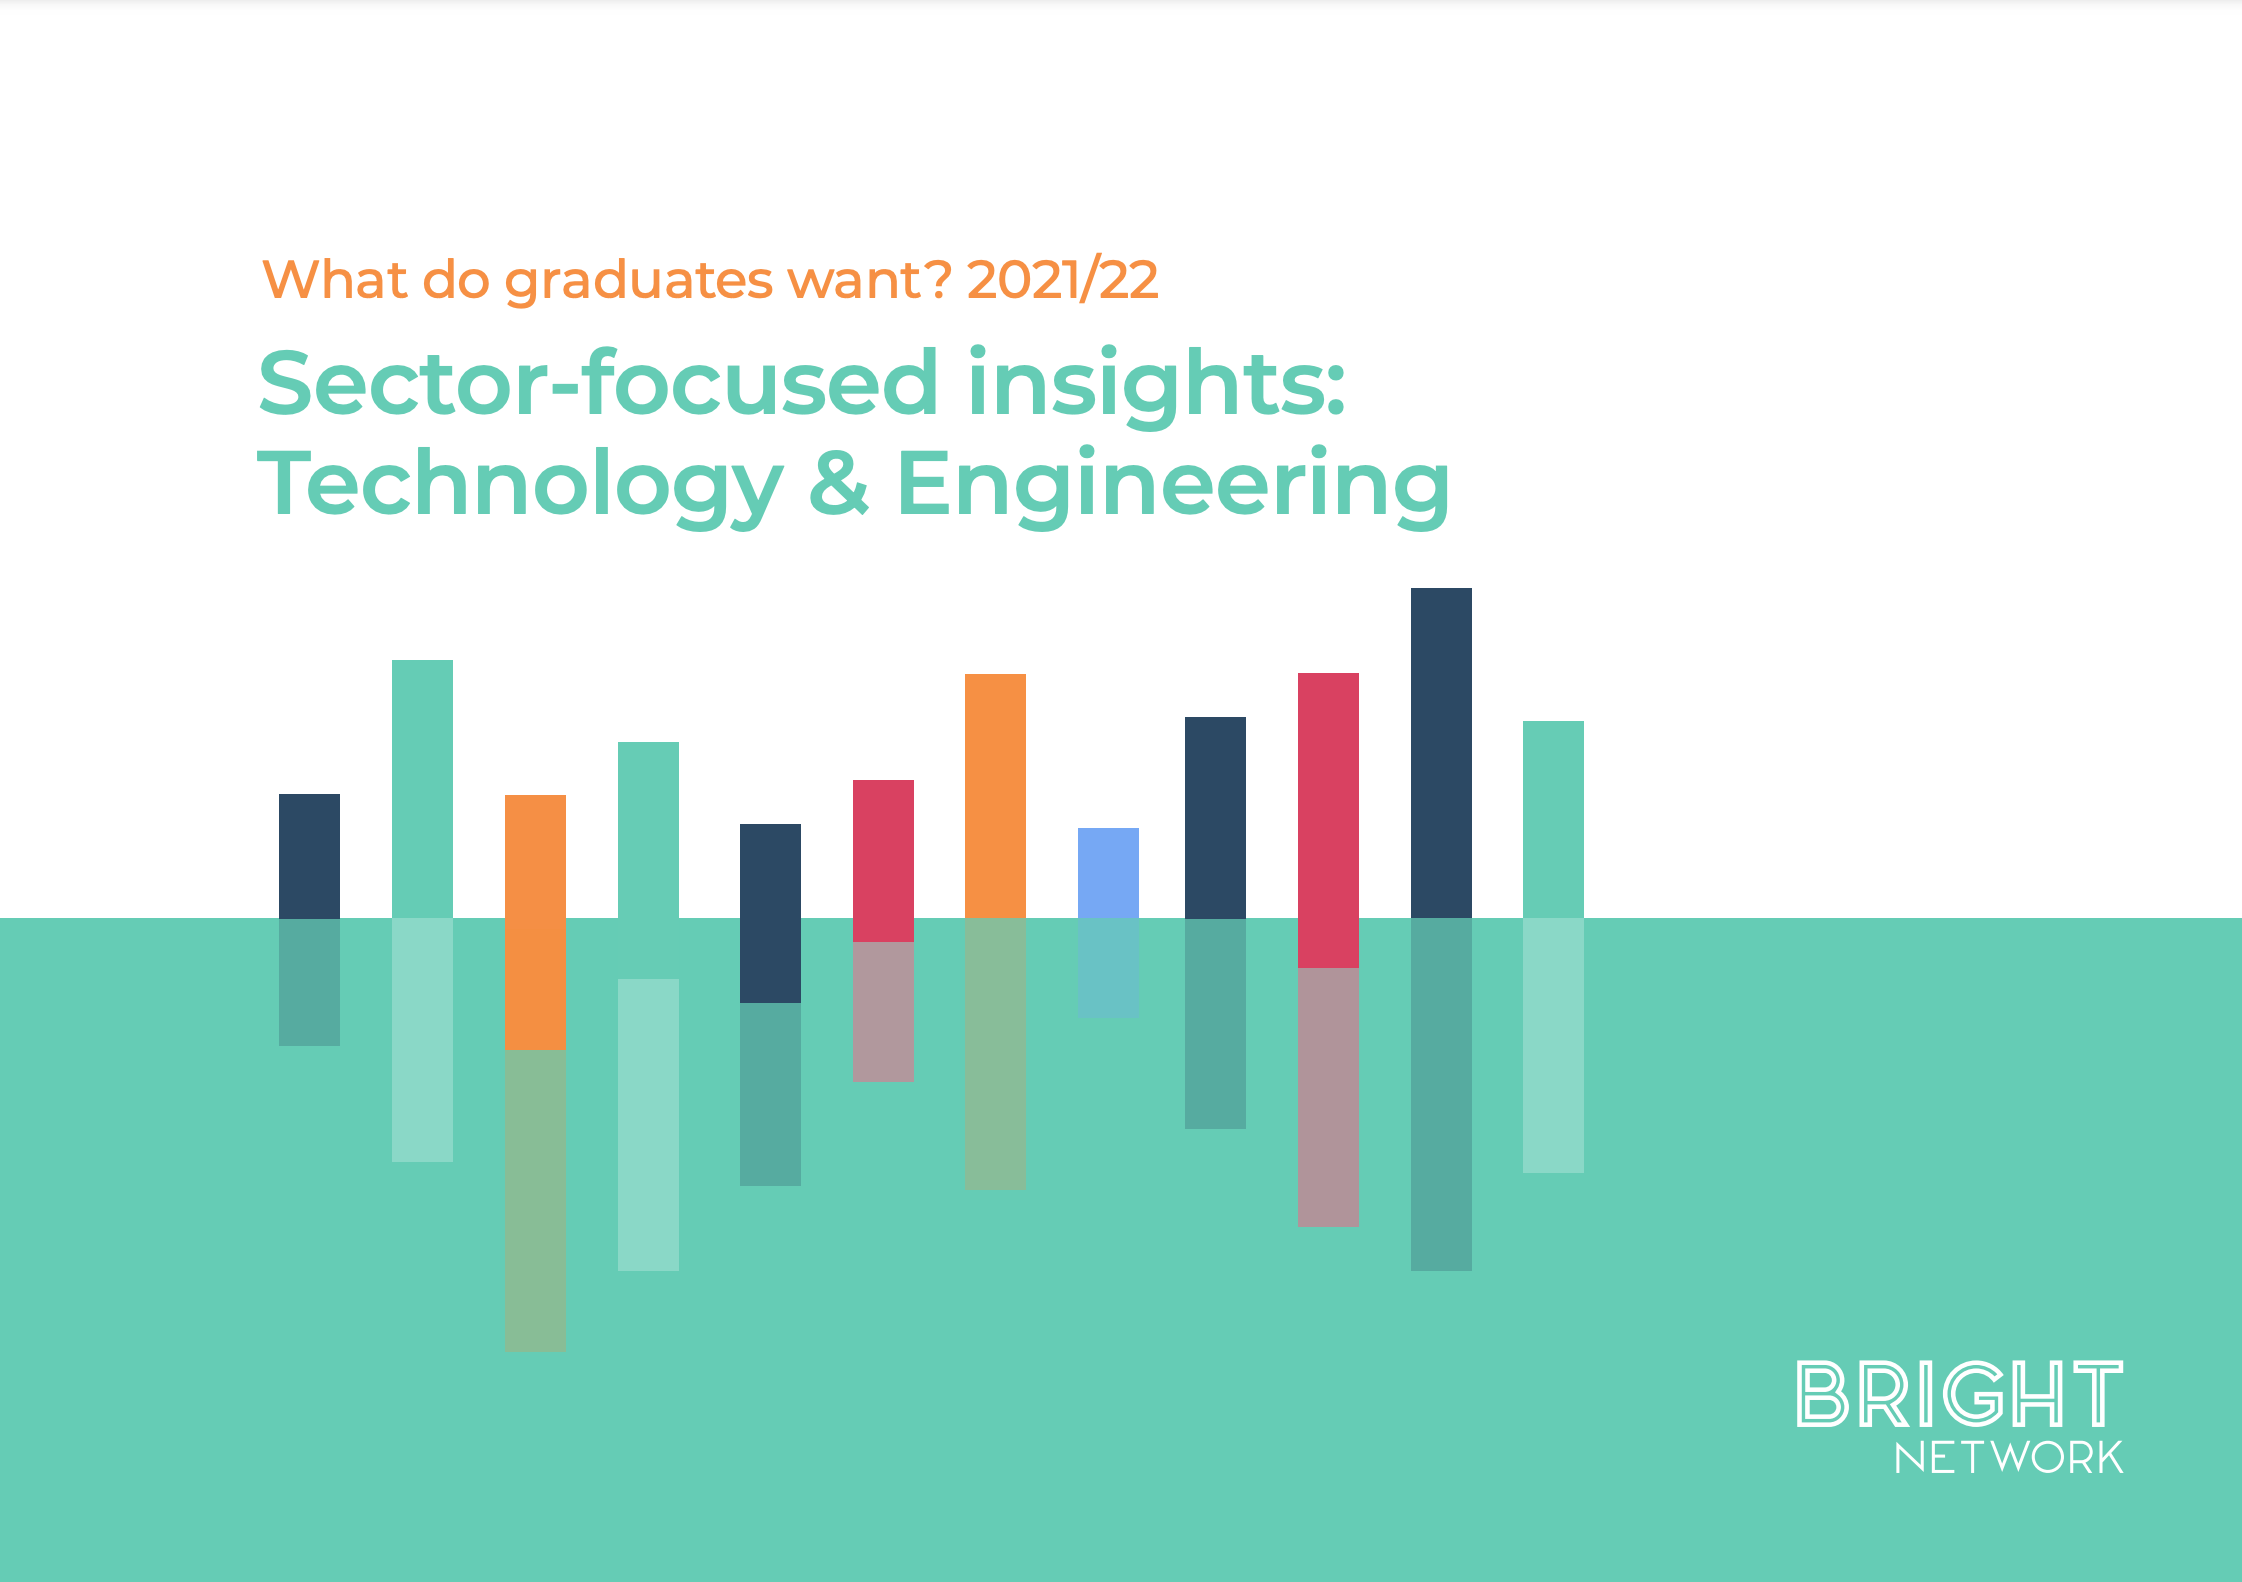 Sector-focused insights: Technology & Engineering